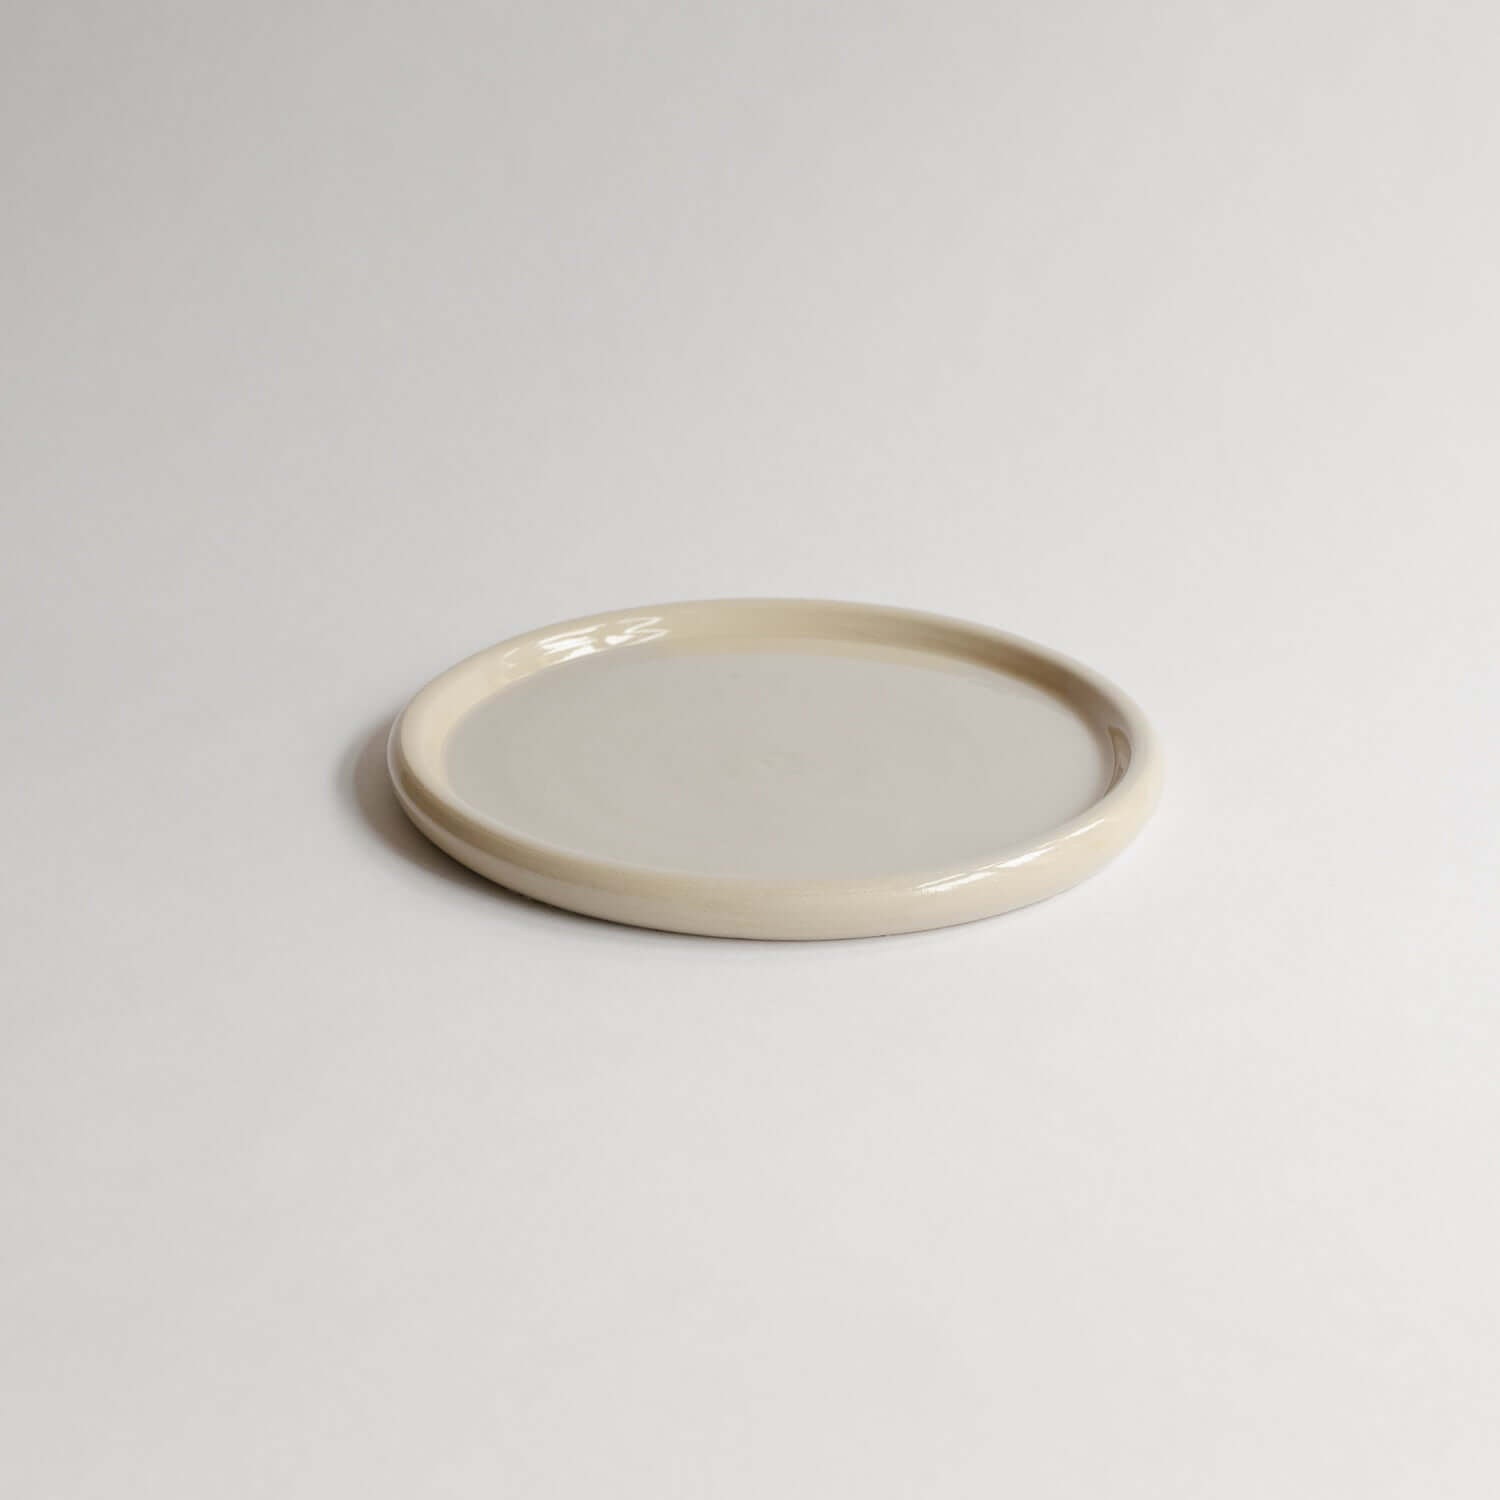 Unique Aleah Creme Plate, 19cm, with a refined glossy finish. Each lovingly handcrafted piece varies slightly, showcasing the beauty of its creation. von viola beuscher ceramics